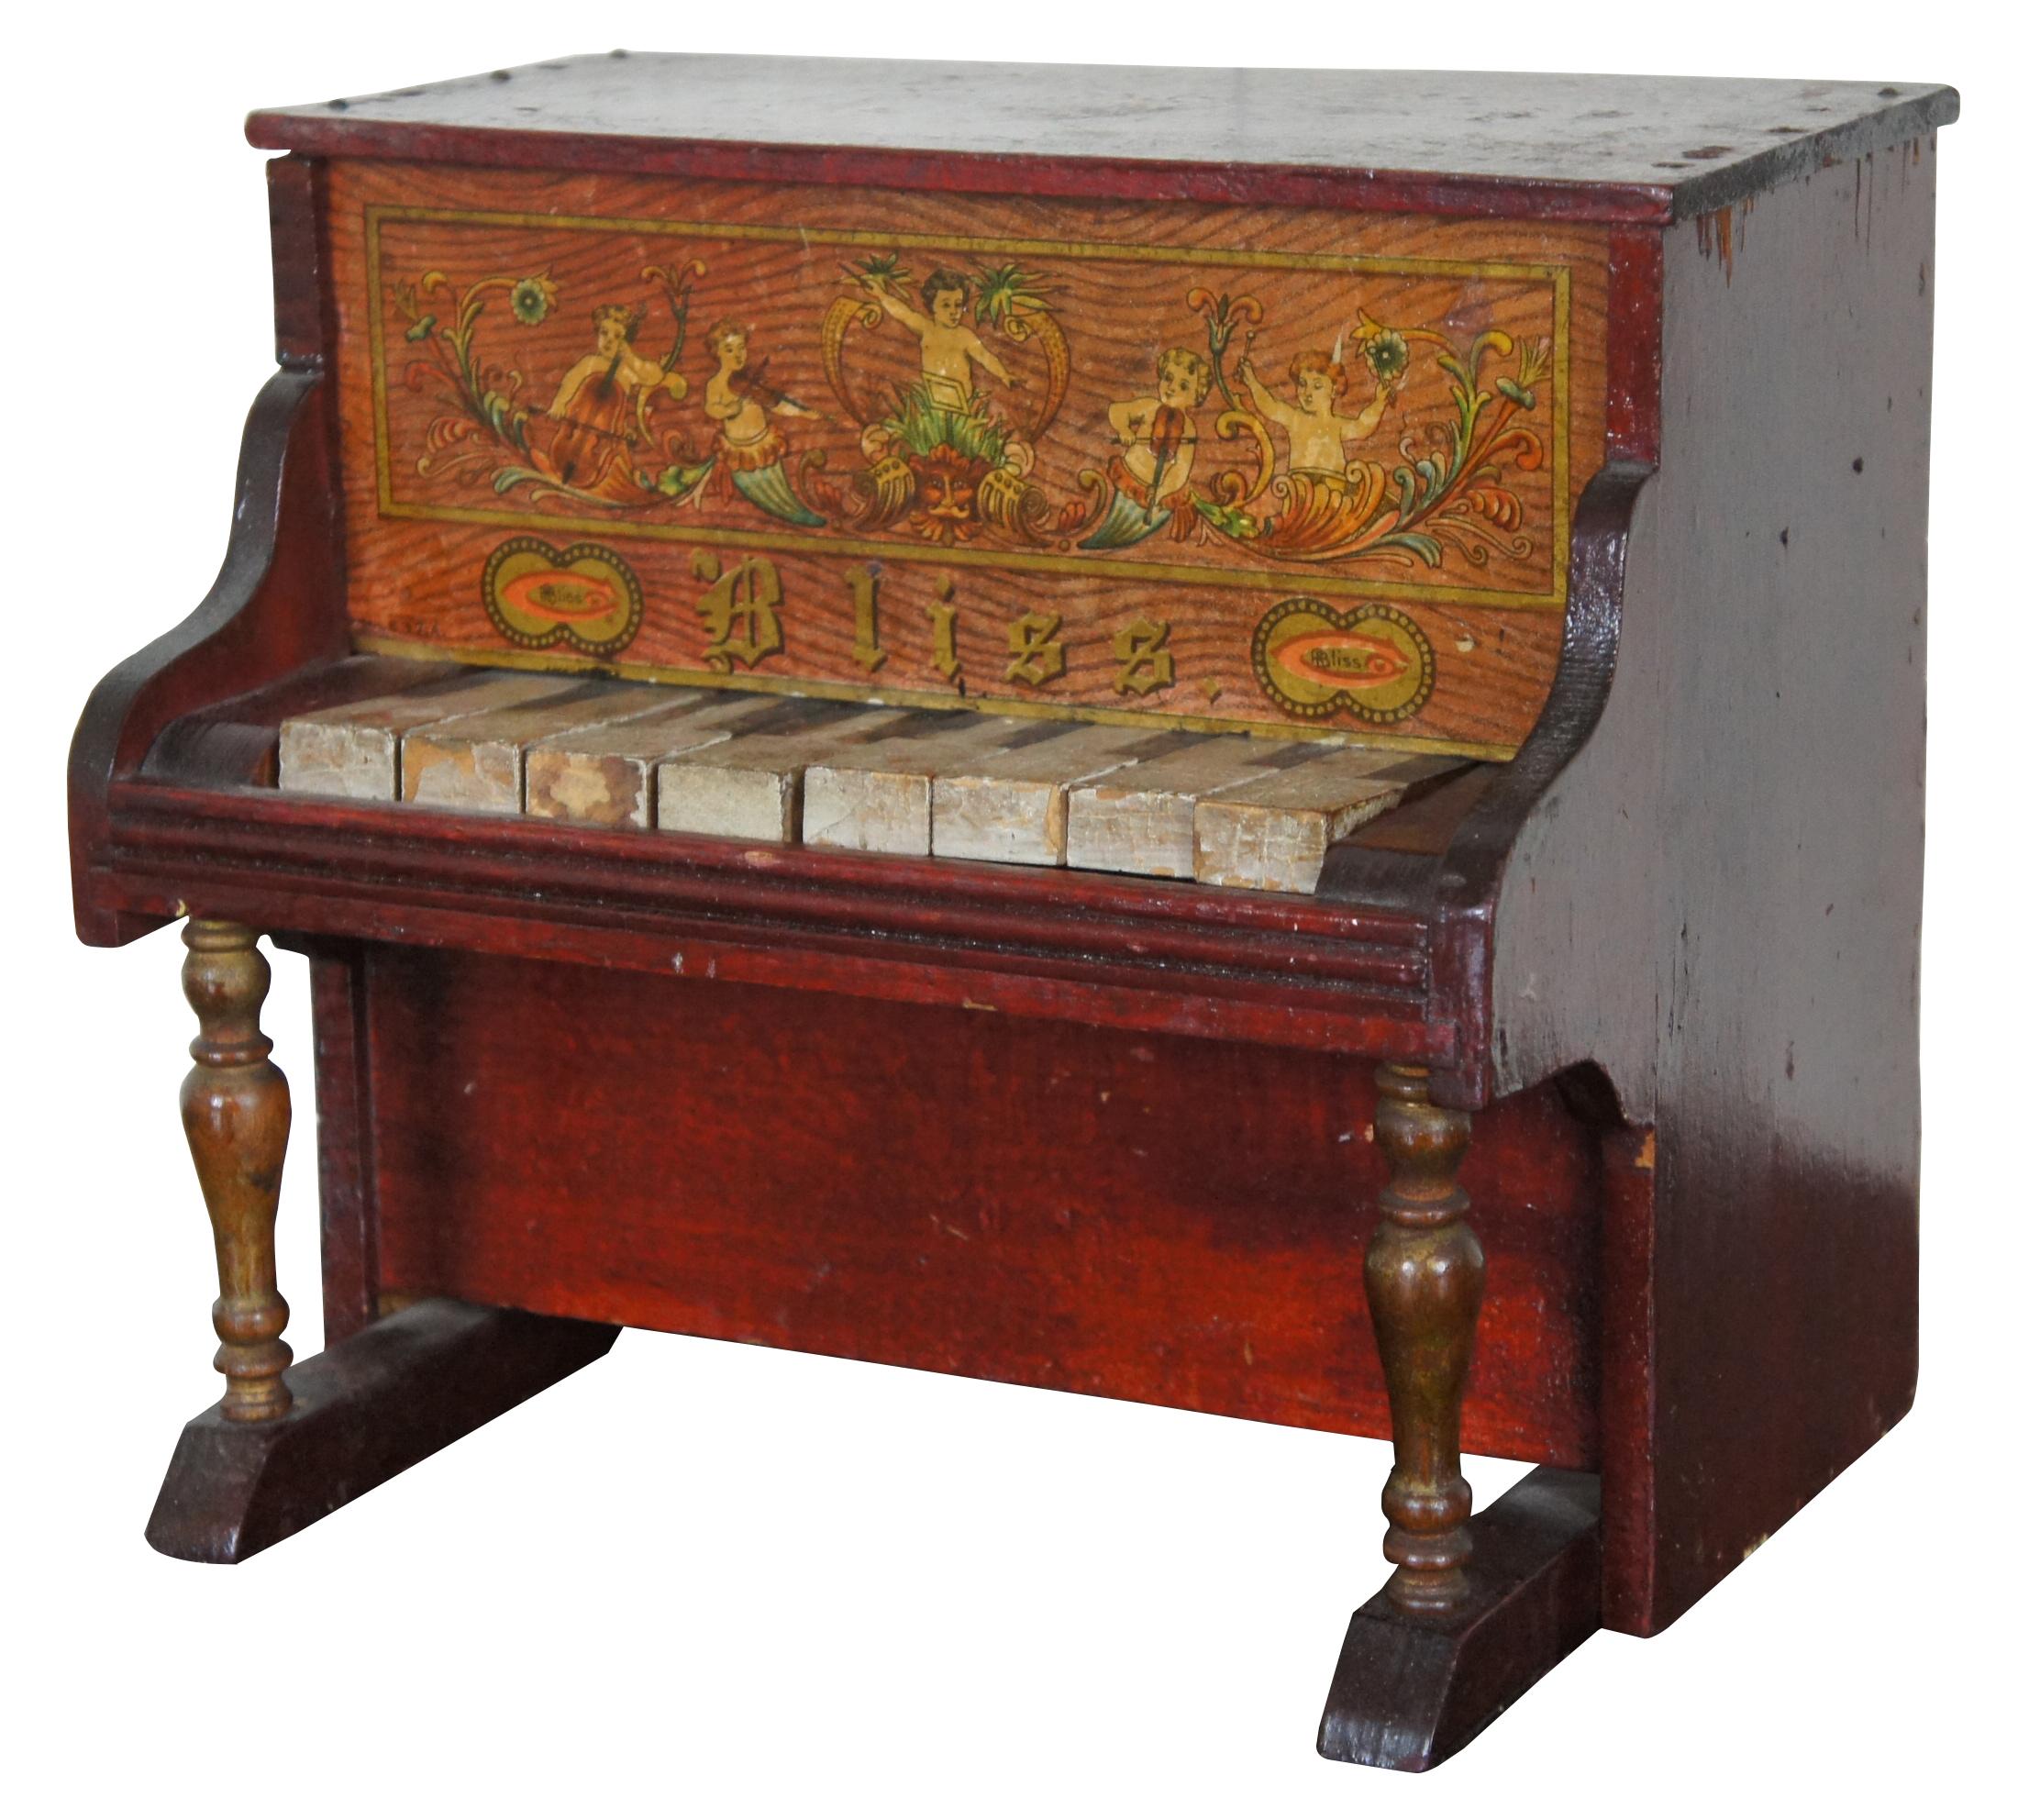 Antique wooden toy upright piano by Bliss with lithograph print featuring an orchestra of cherubs. Eight working wooden keys that strike on a miniature glockenspiel inside.
  